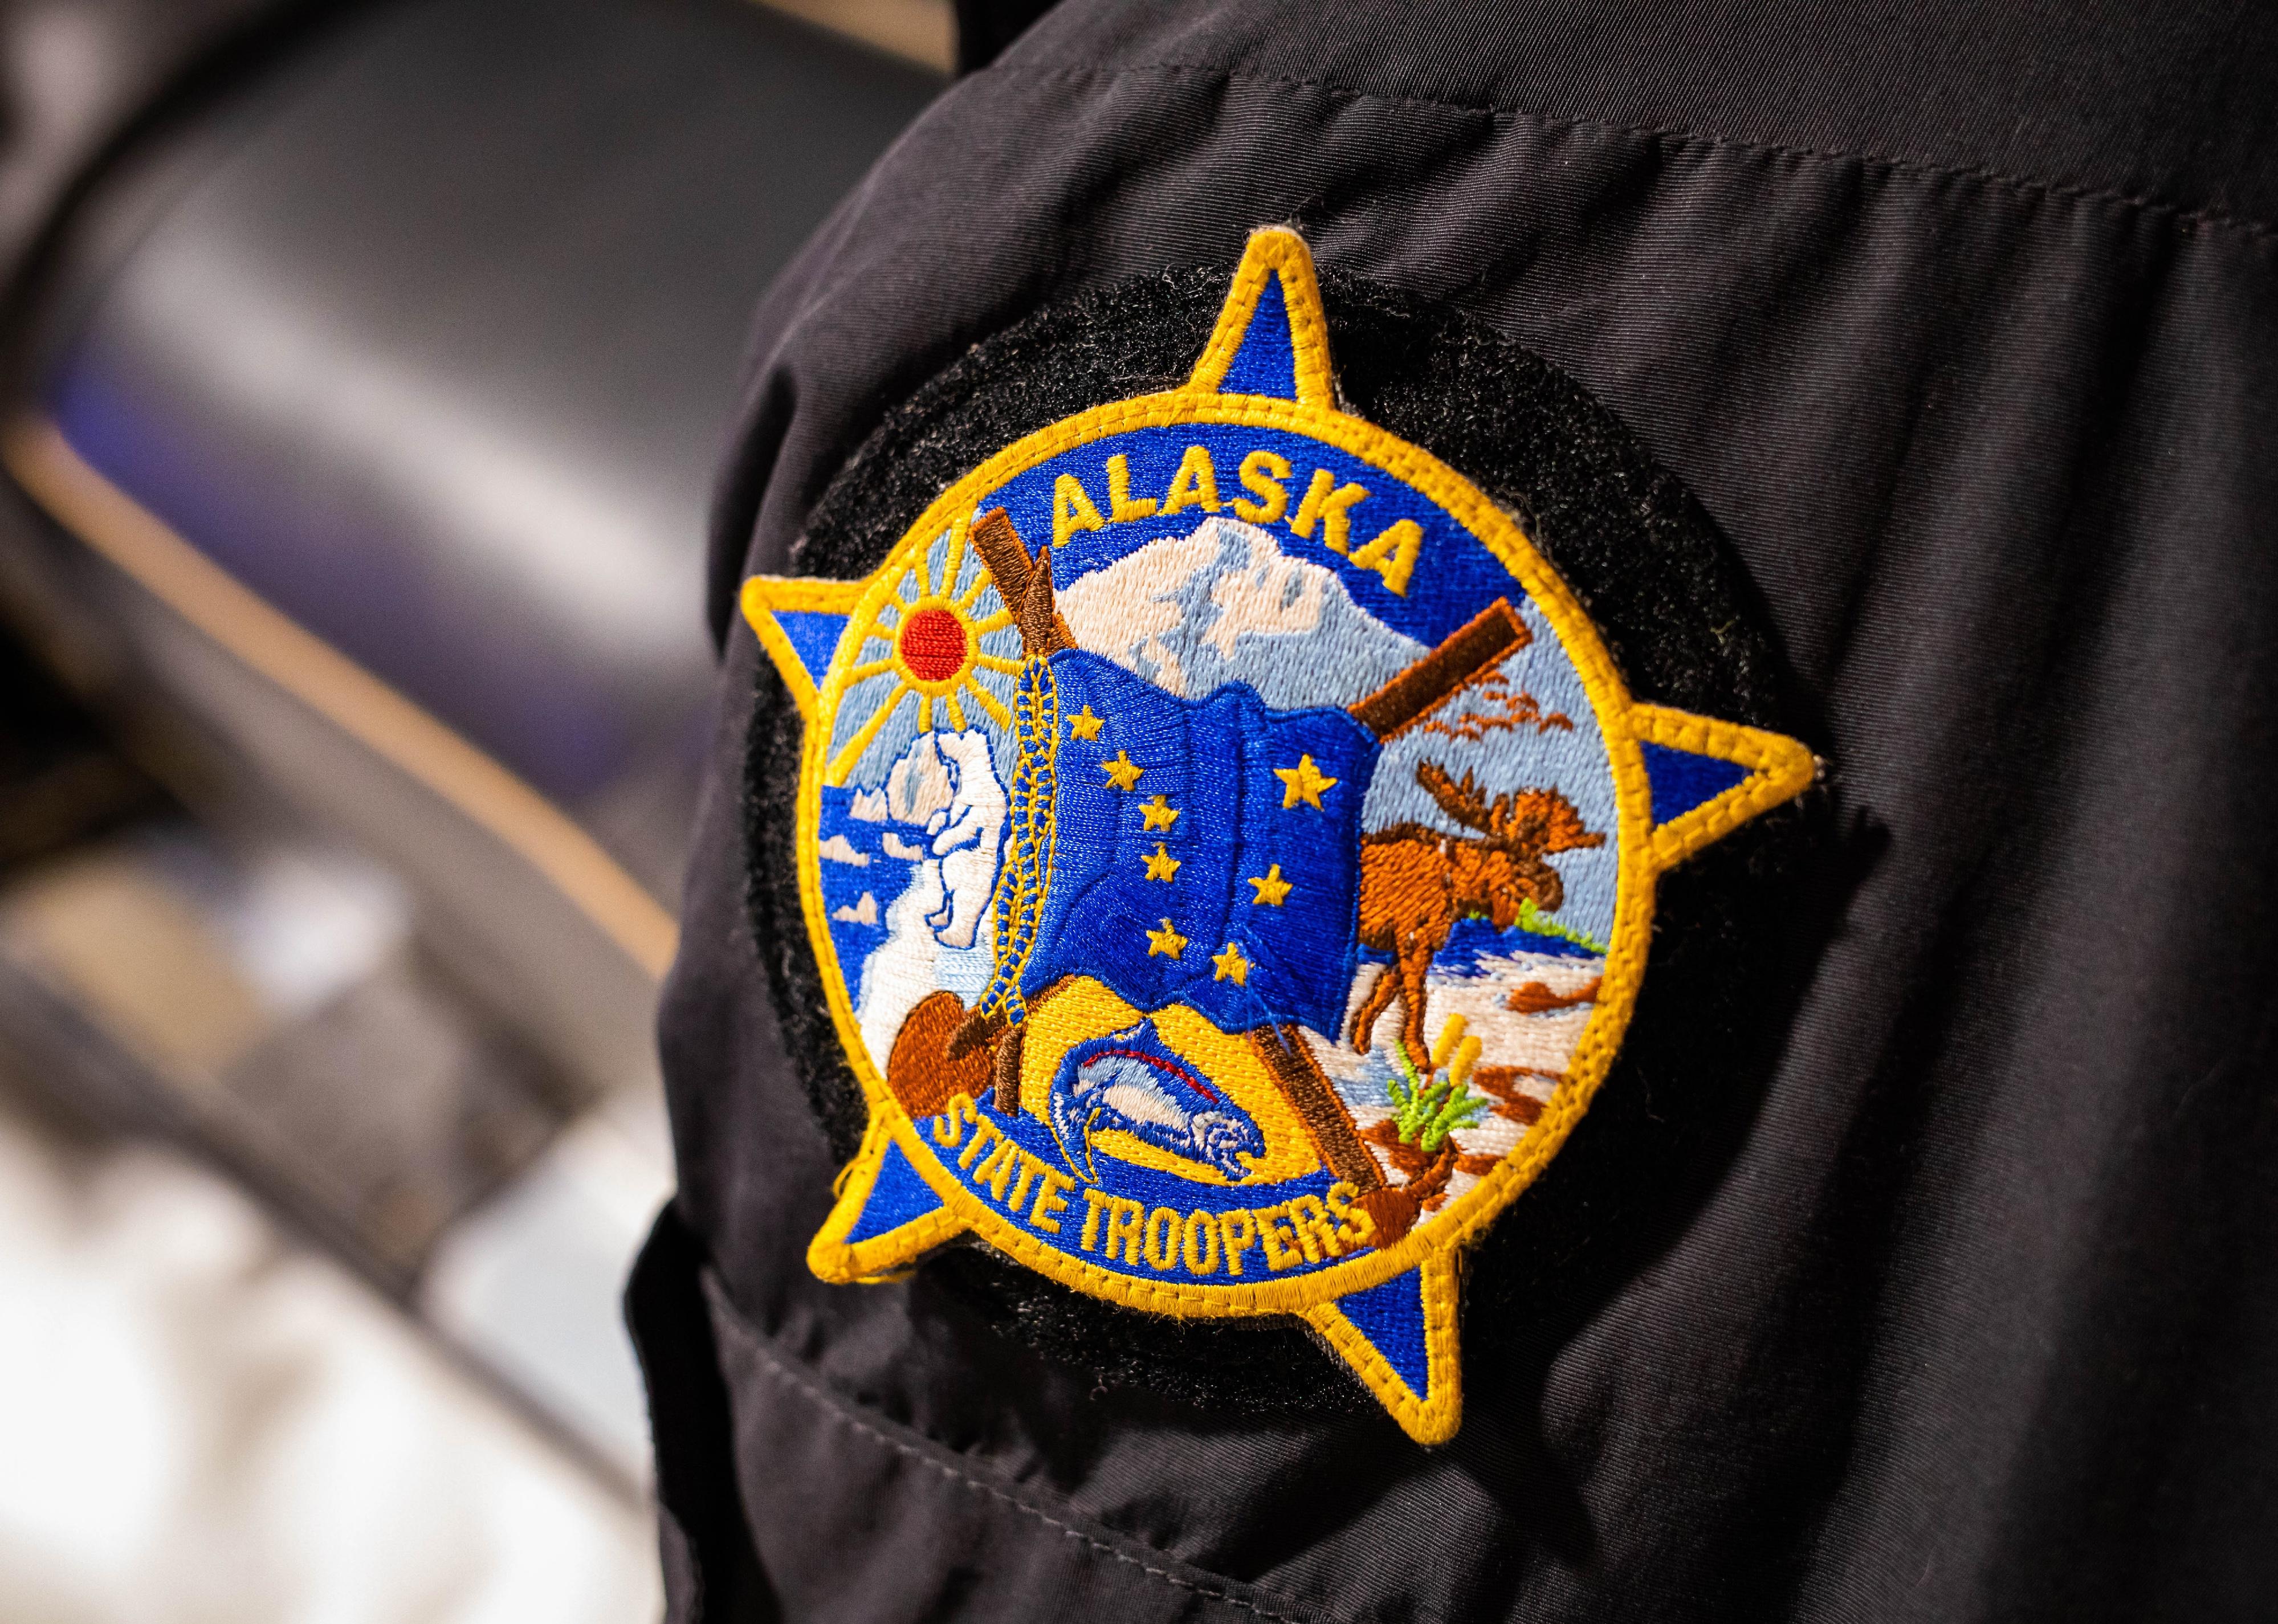 Alaska state trooper official batch icon on clothes close up.